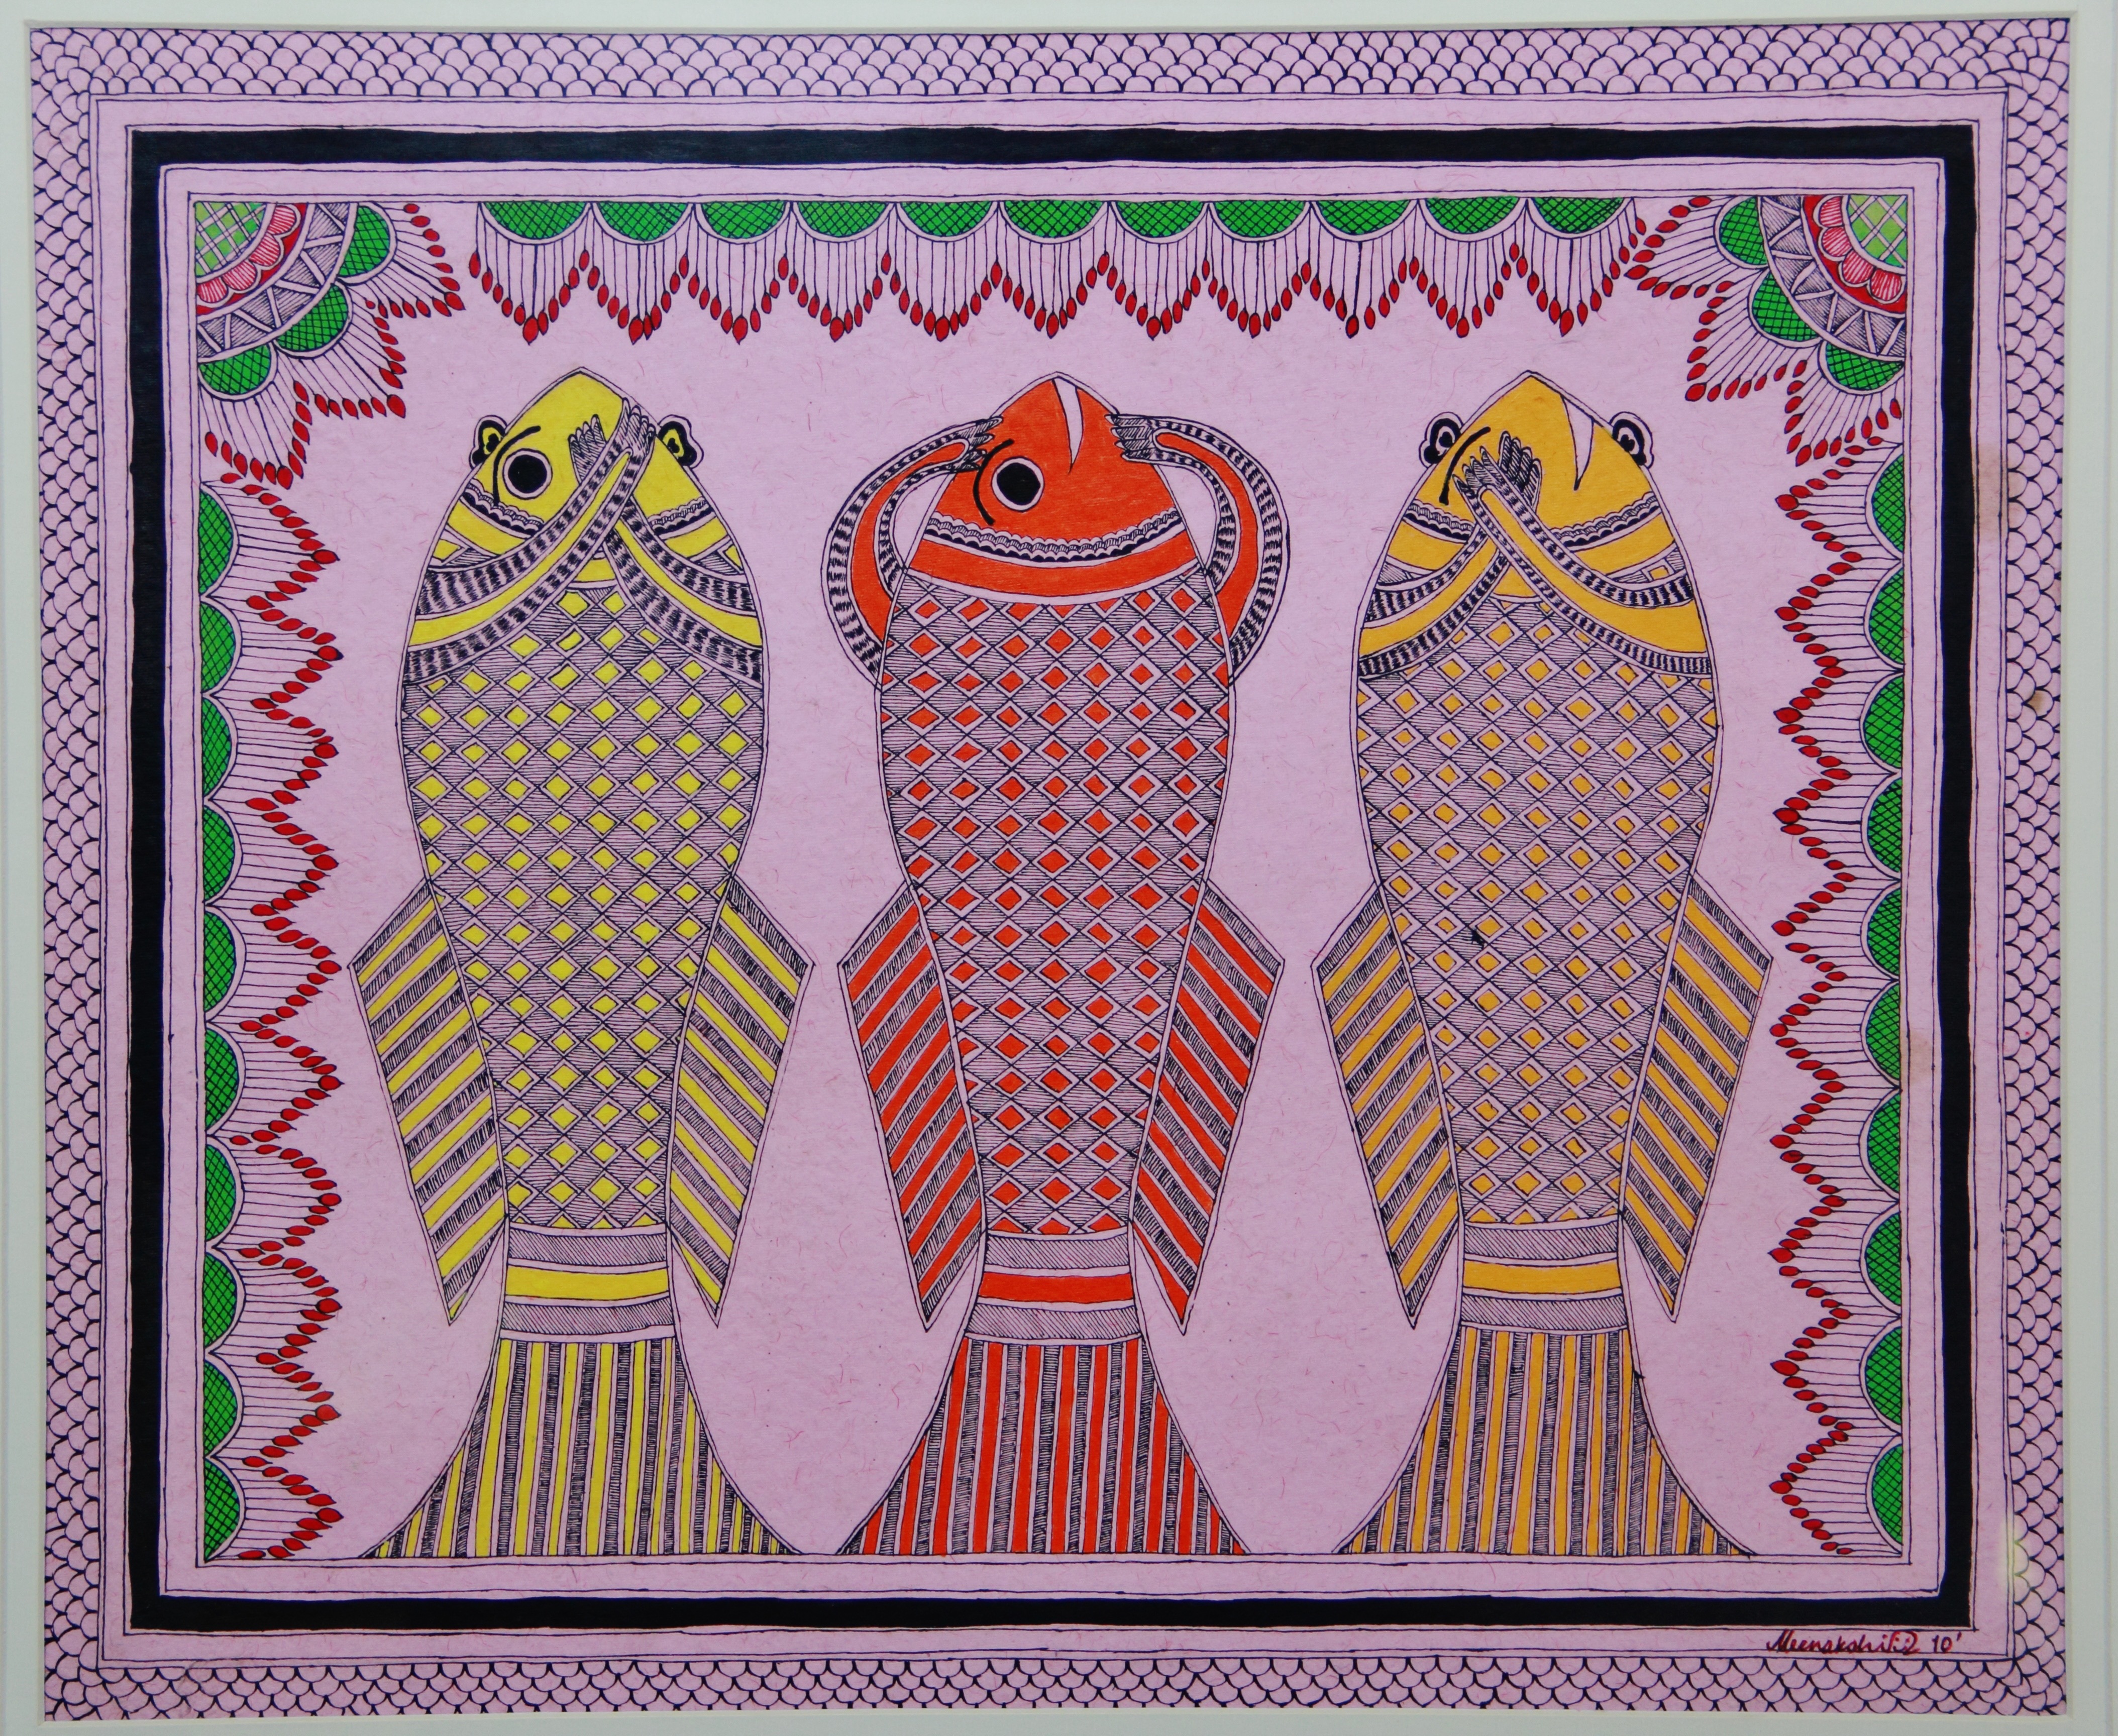 One of the earliest works in Madhubani Style. 